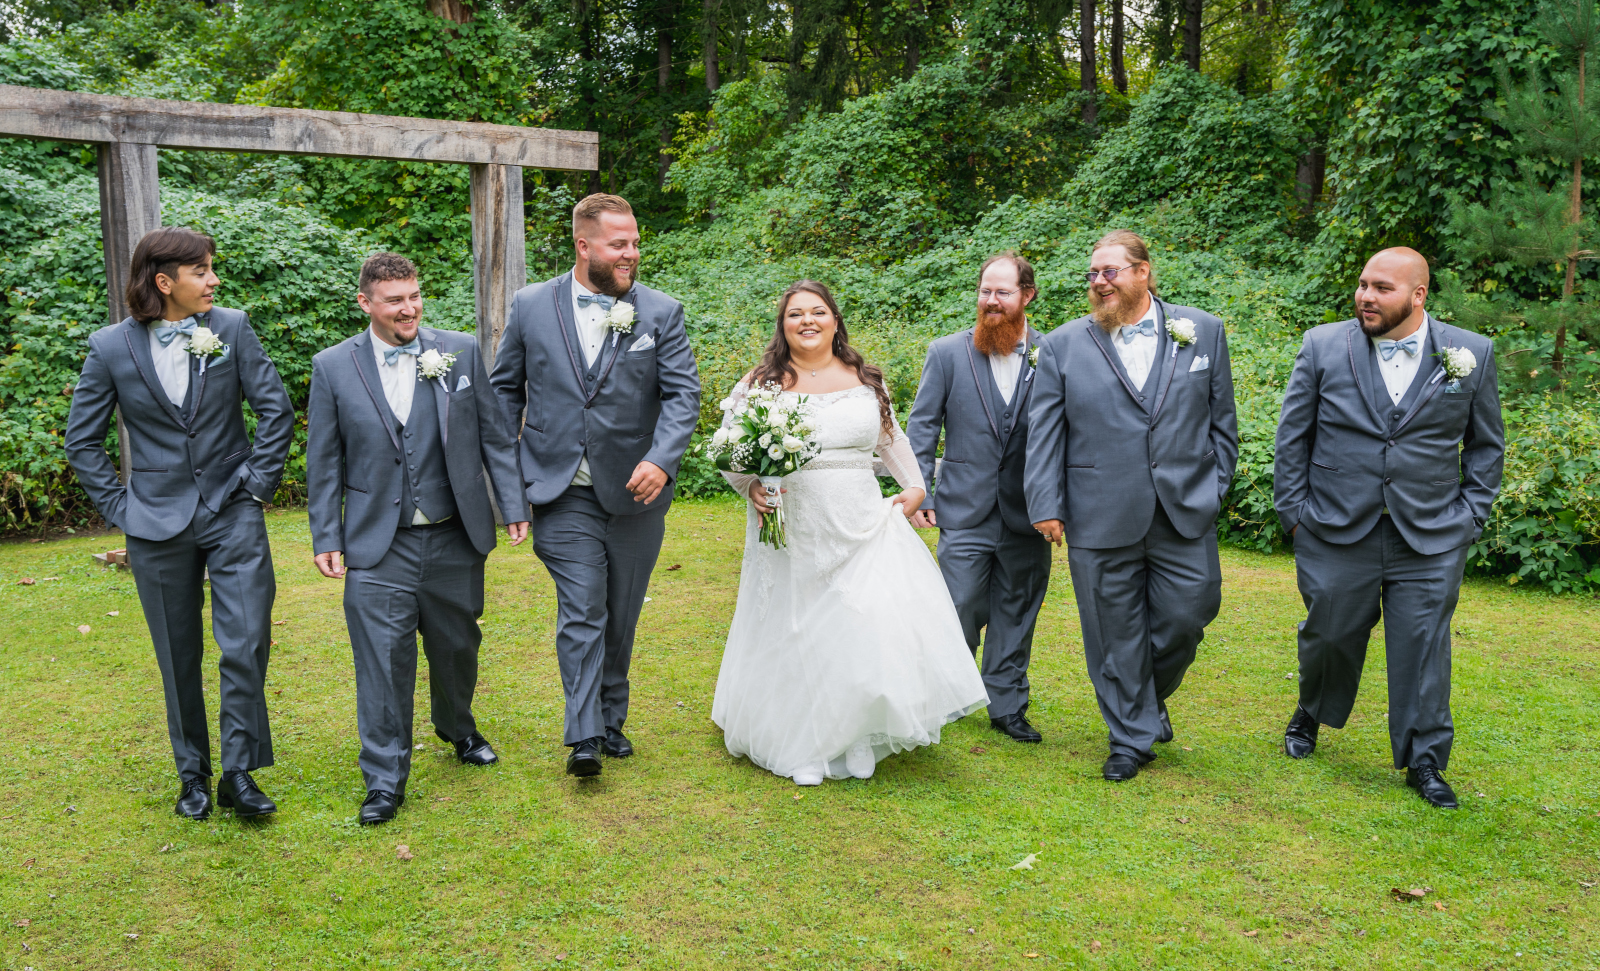 Bride with groomsmen, walking, candid, smiling, rustic wooden arch, green, nature, trees, outdoor September wedding ceremony at Westfall Event Center